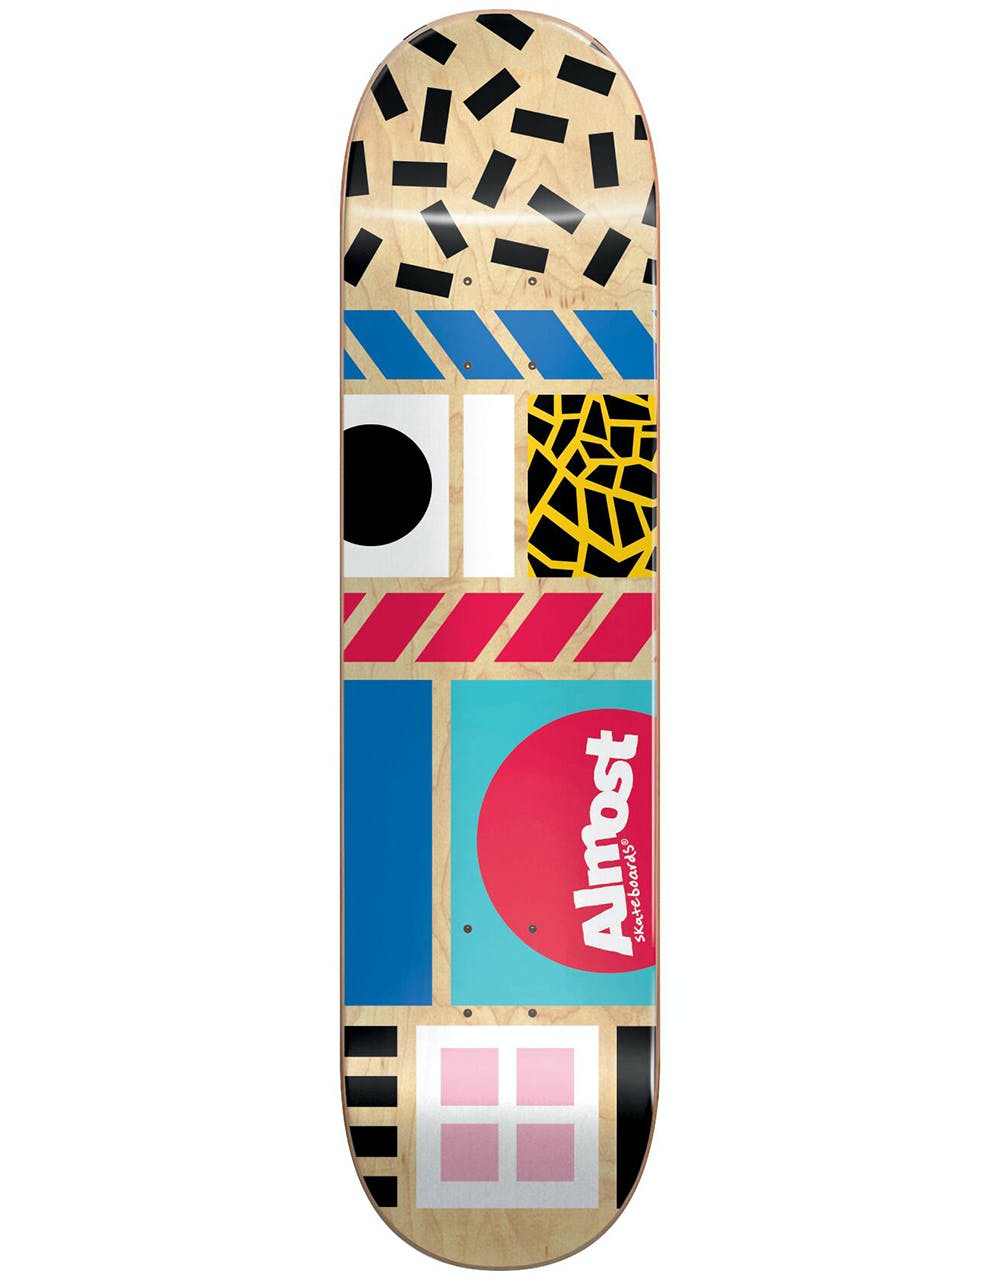 Almost New Wave Skateboard Deck - 8.25"